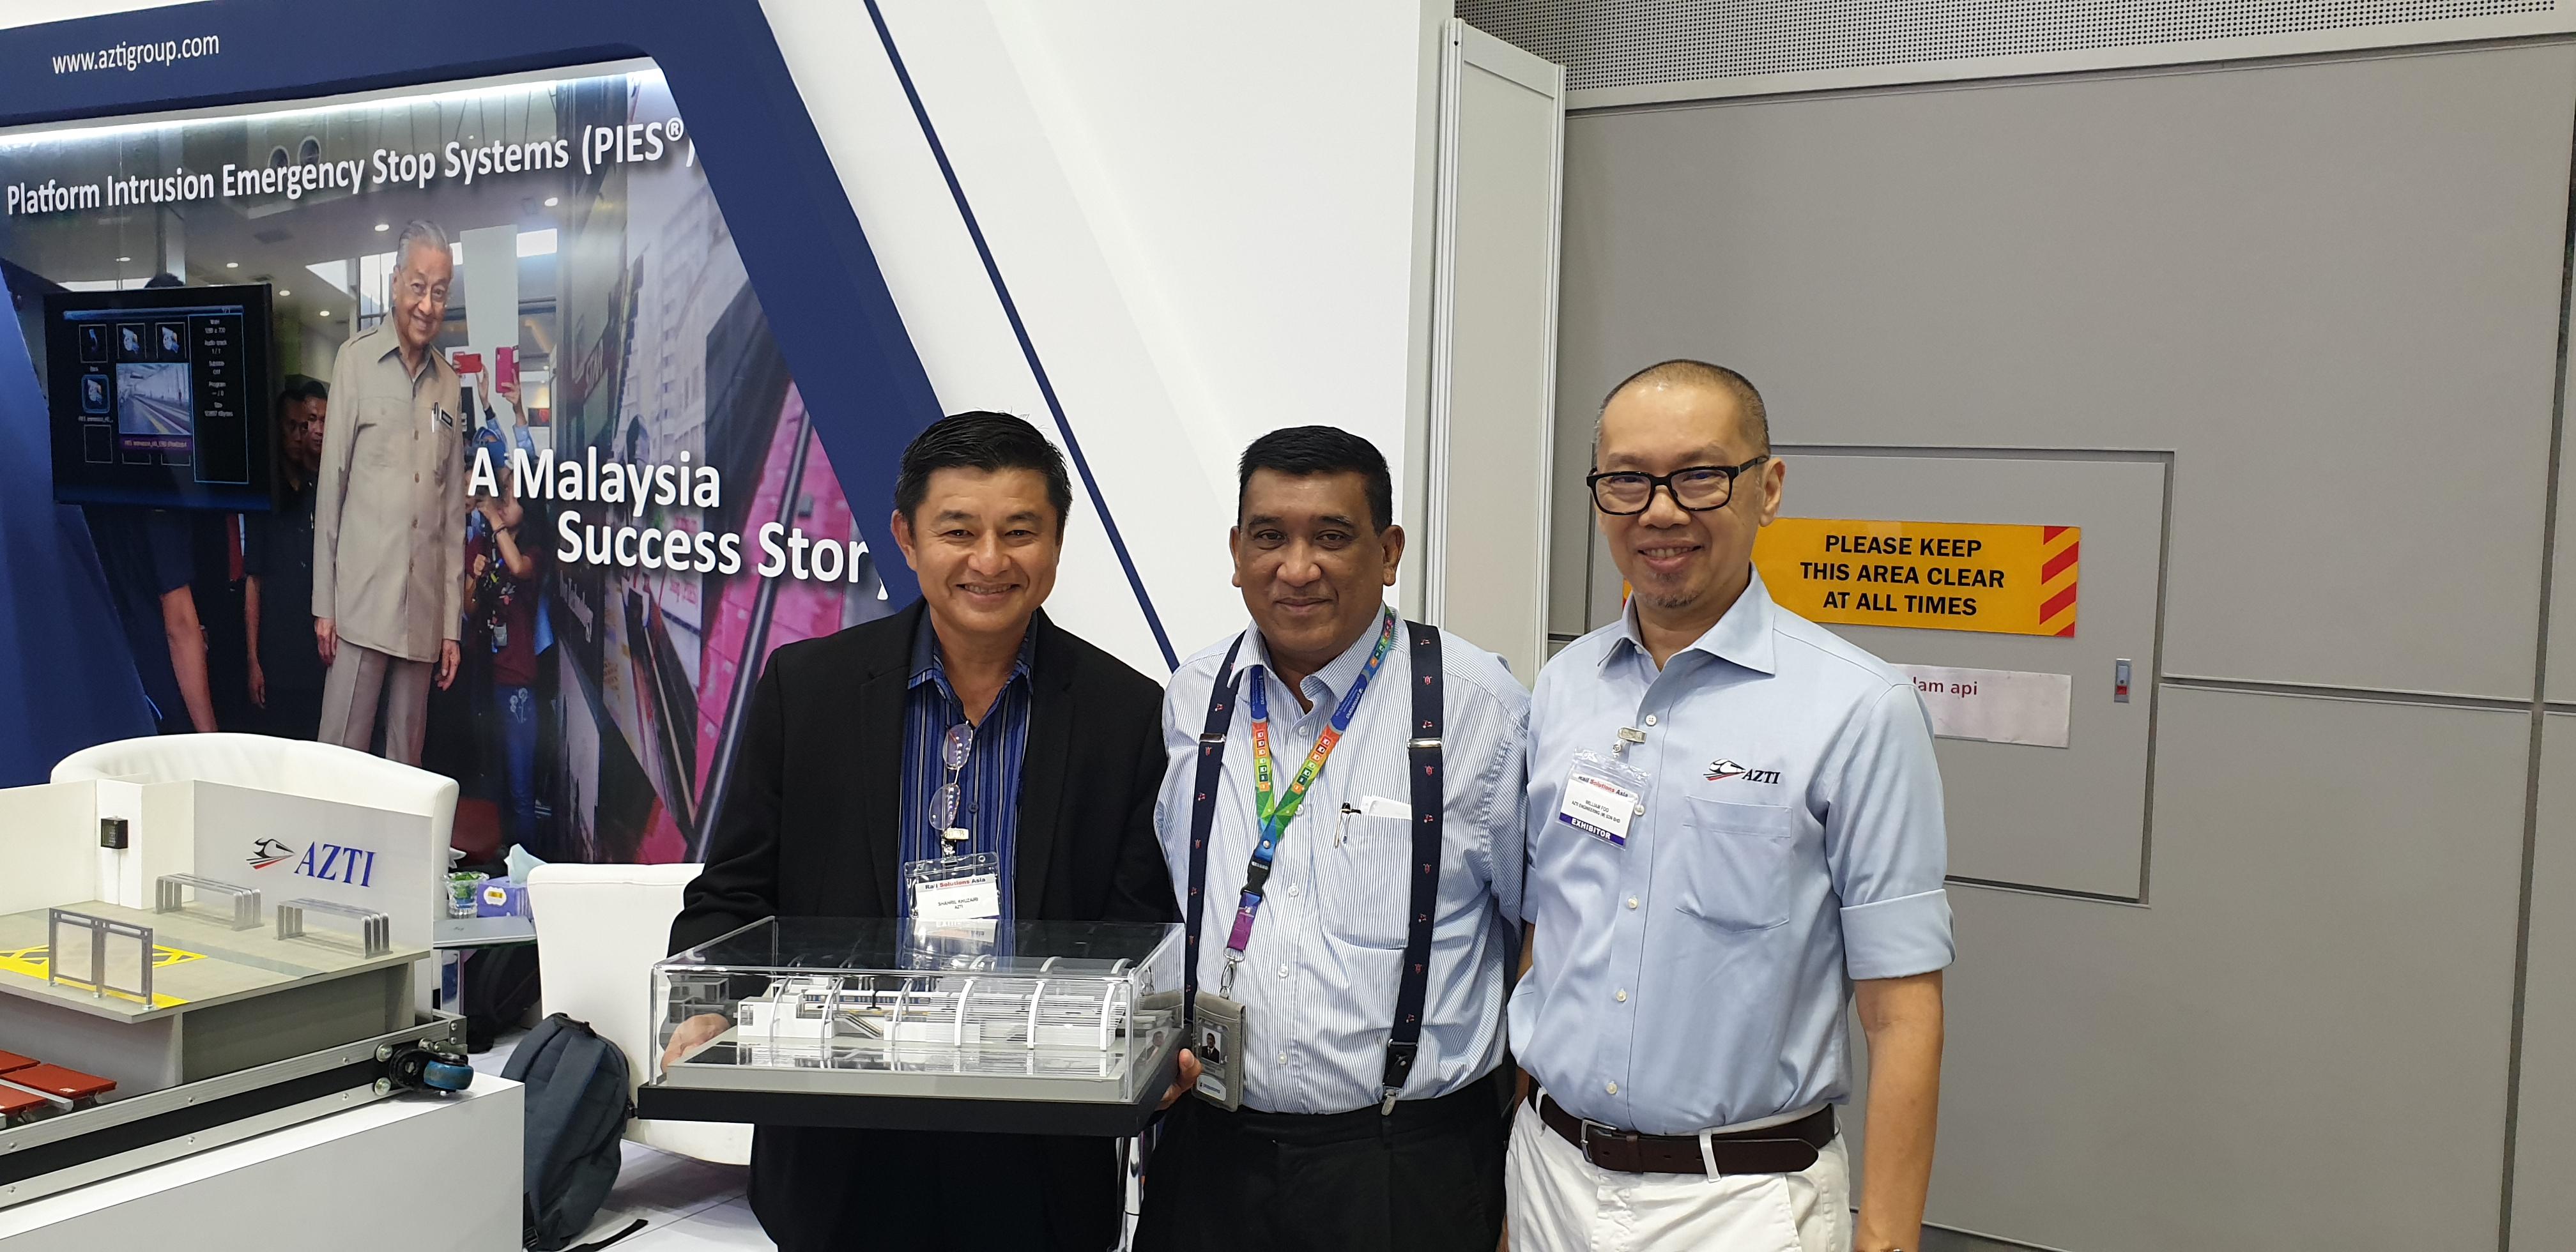 Rail Solutions Asia 2019